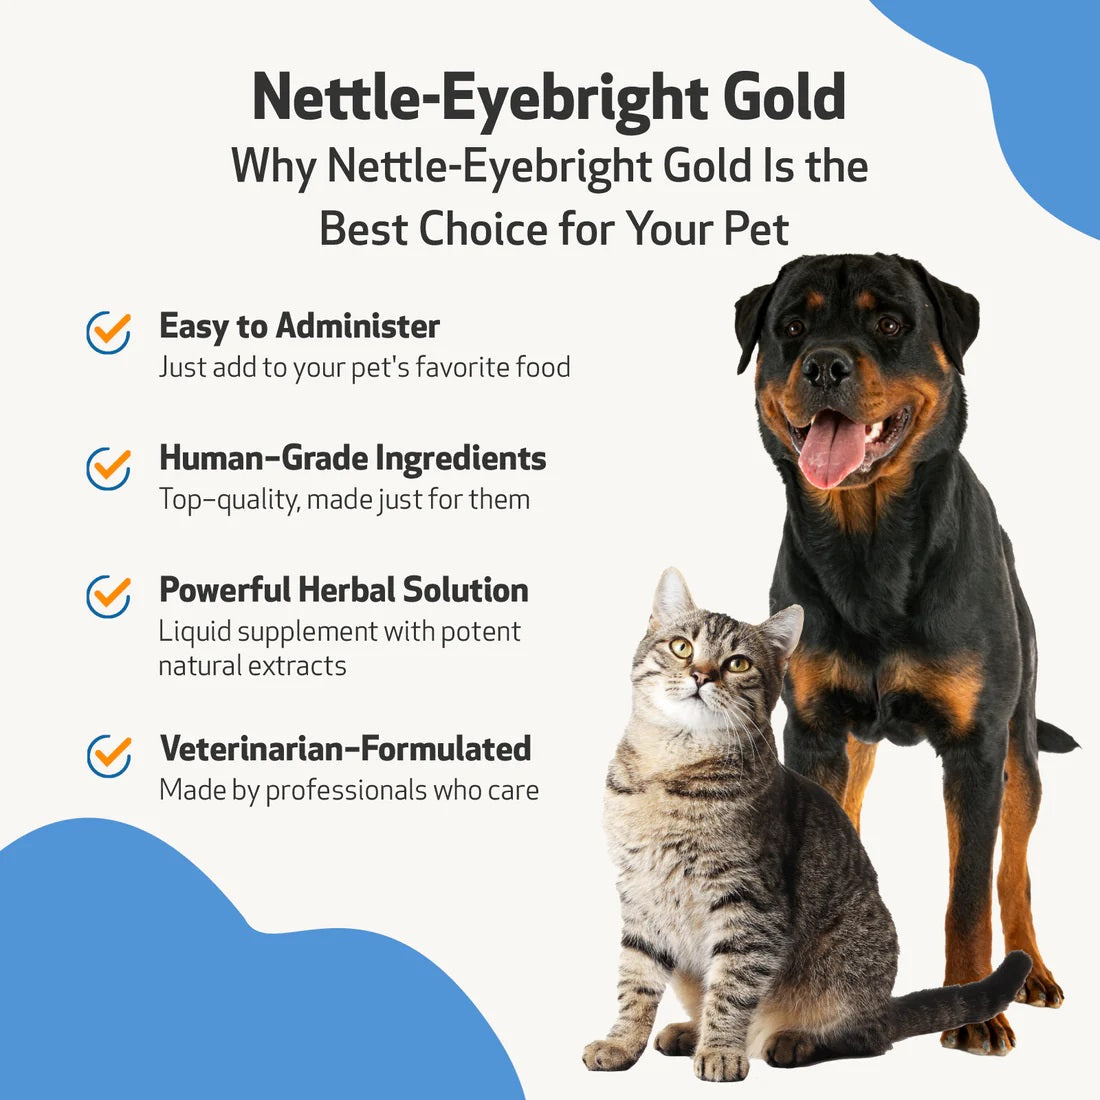 Pet Wellbeing - Nettle-Eyebright Gold - Allergy Defense for Cats & Dogs with Seasonal Sneezing or Stuffy Nose (2oz / 59ml)